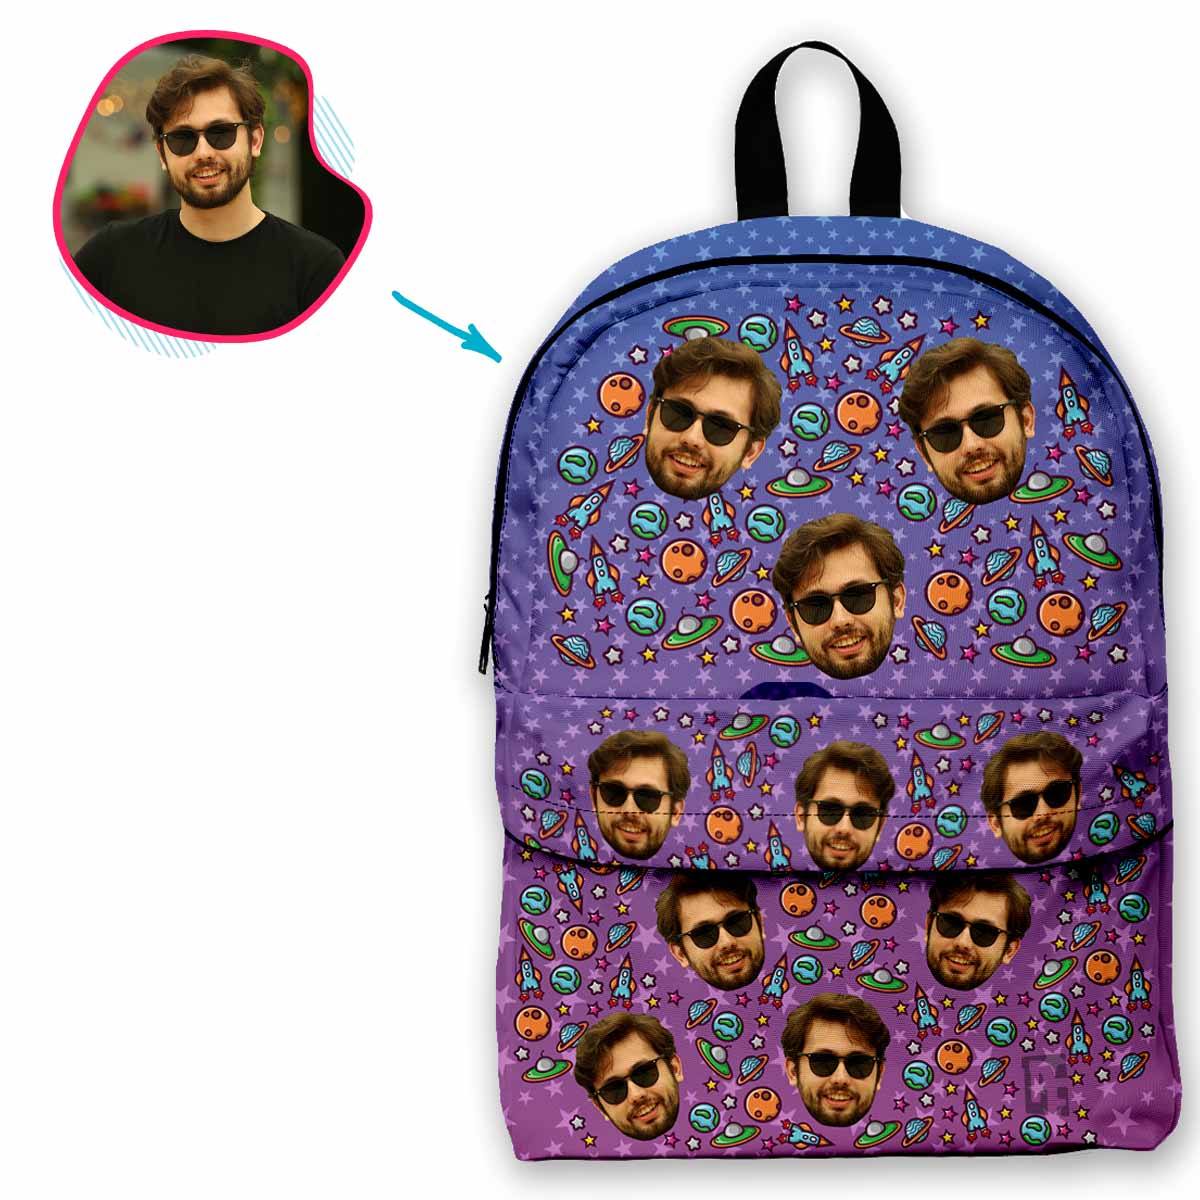 rockets classic backpack personalized with photo of face printed on it